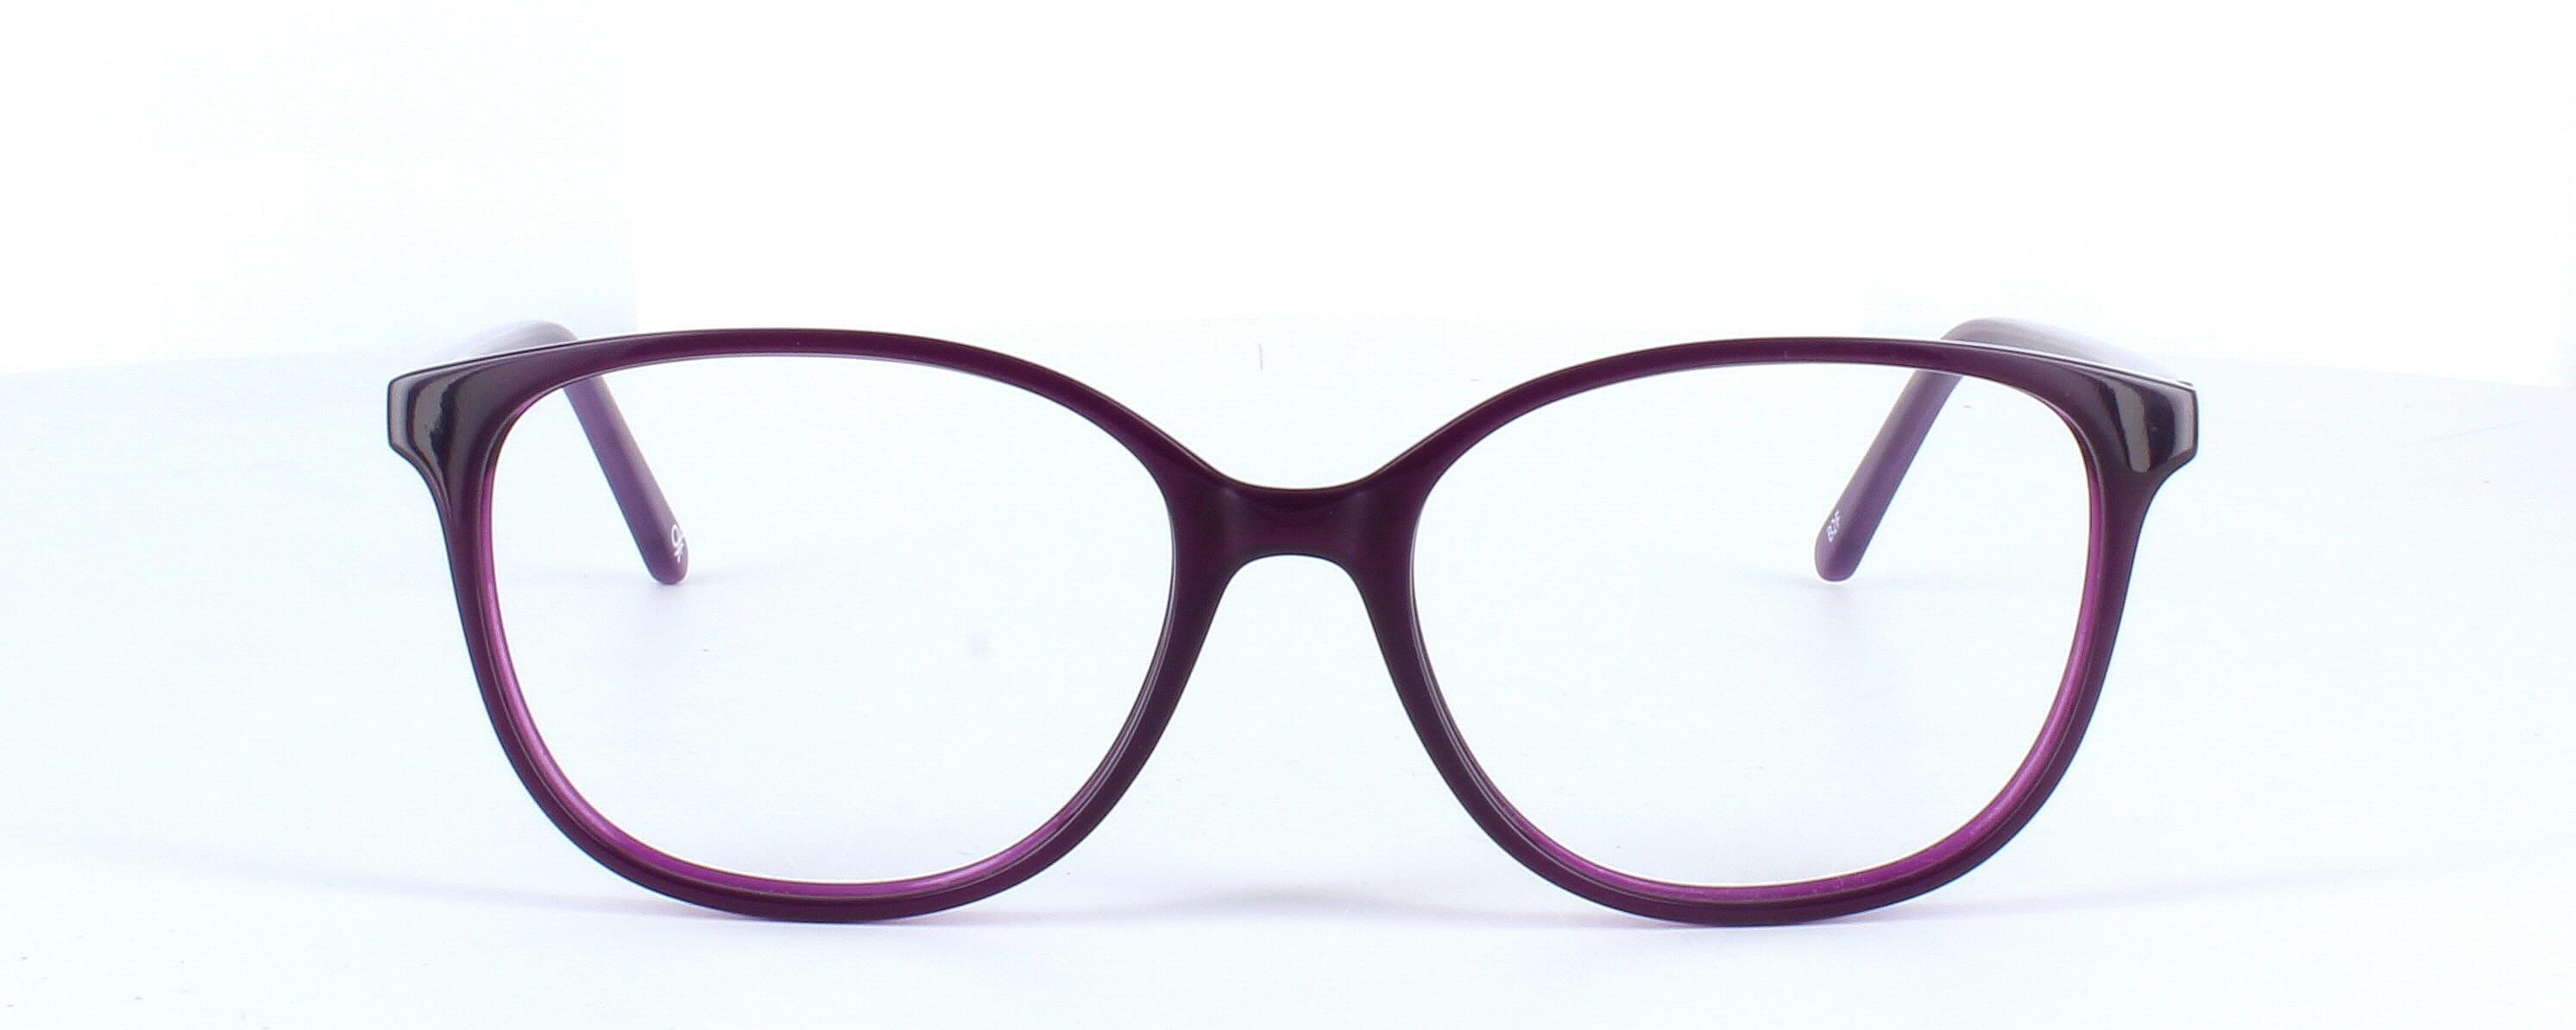 Benetton BEO1031 238 - Women's plastic glasses frame with purple front face and matching sprung hinged arms - image view 2